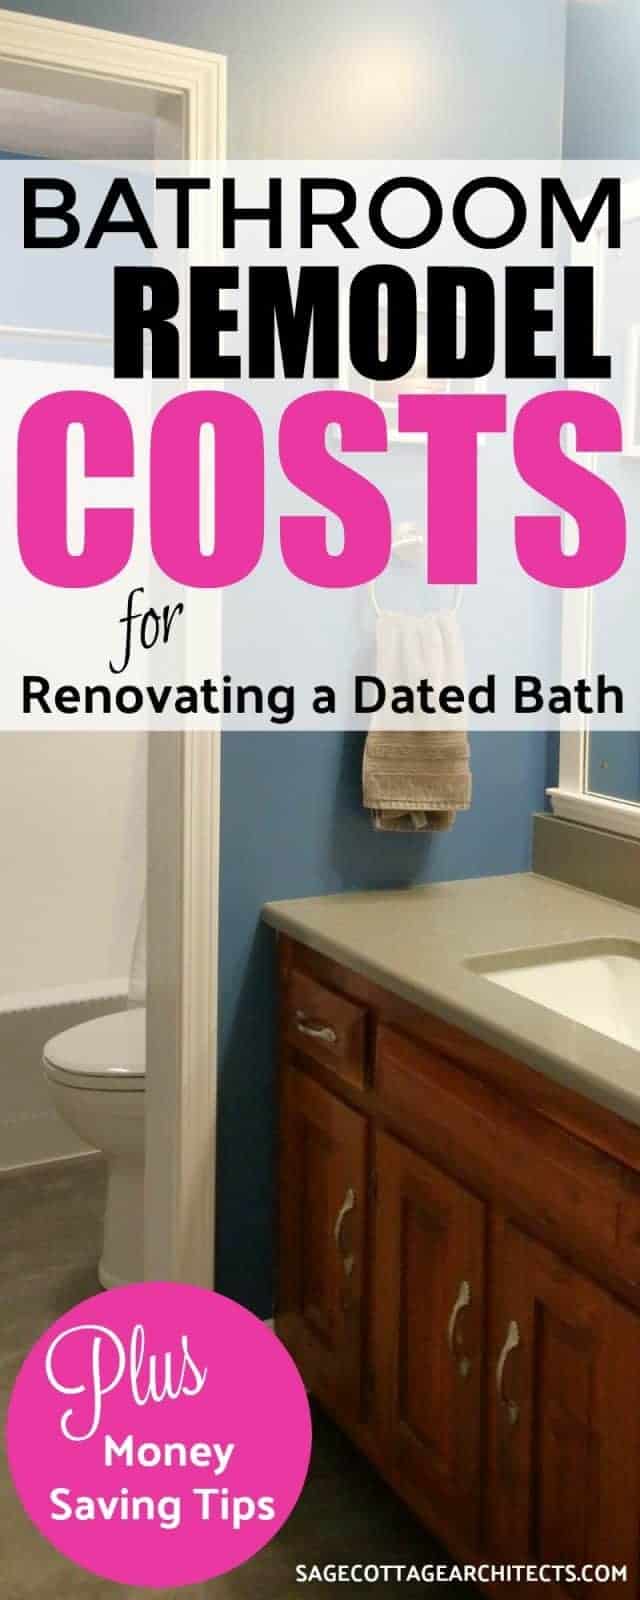 Bathroom remodel costs for a dark grey and blue bathroom with hickory vanity after remodeling